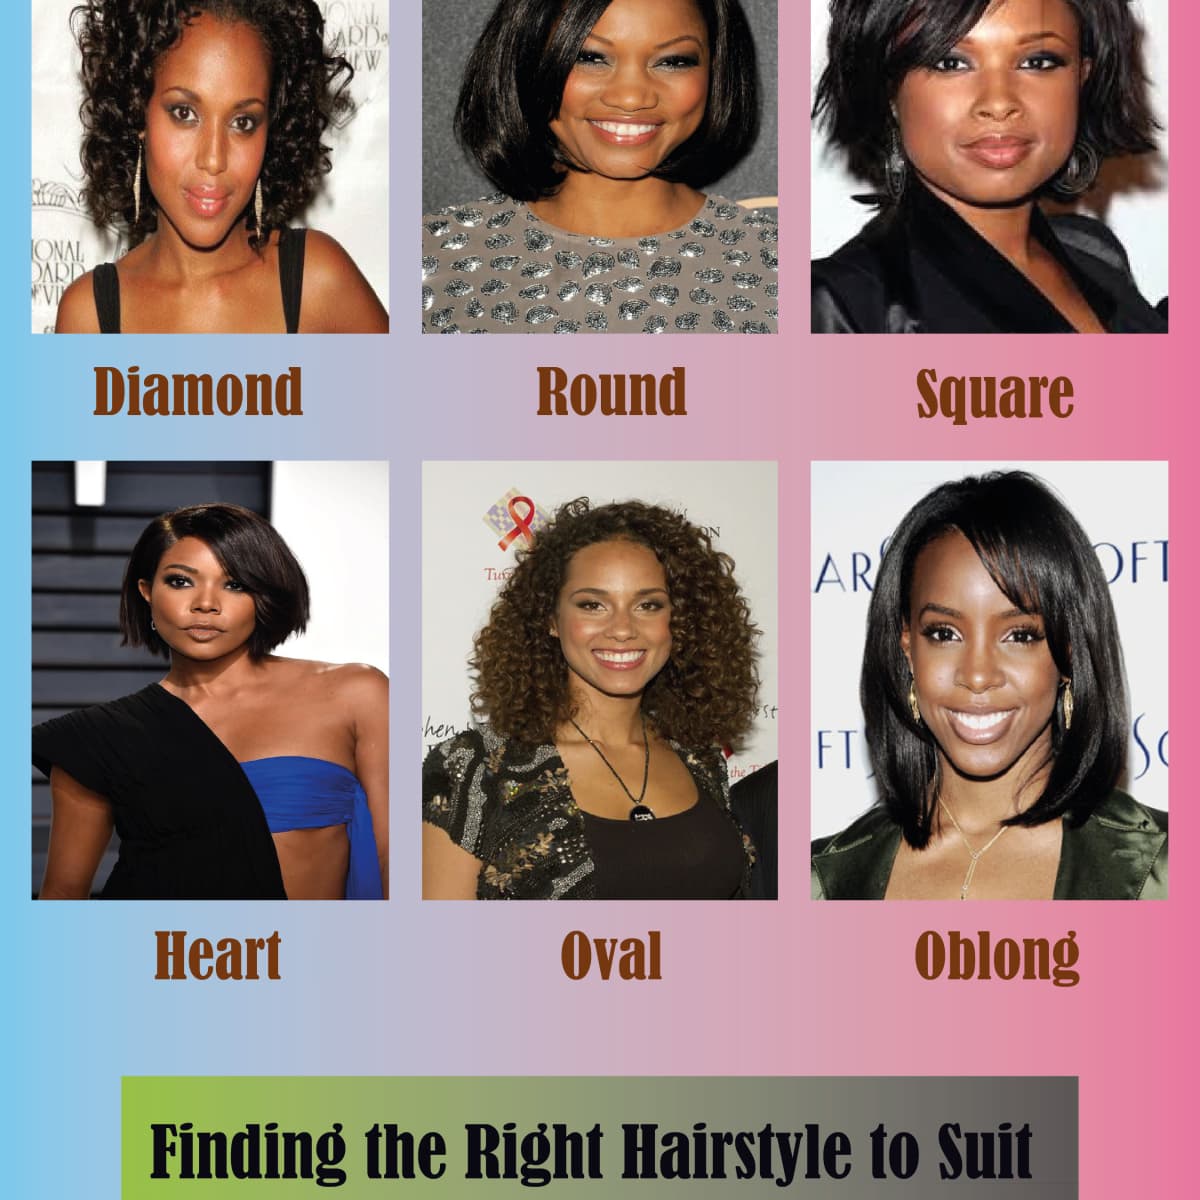 Finding the Right Hairstyle to Suit Your Face Shape - Bellatory